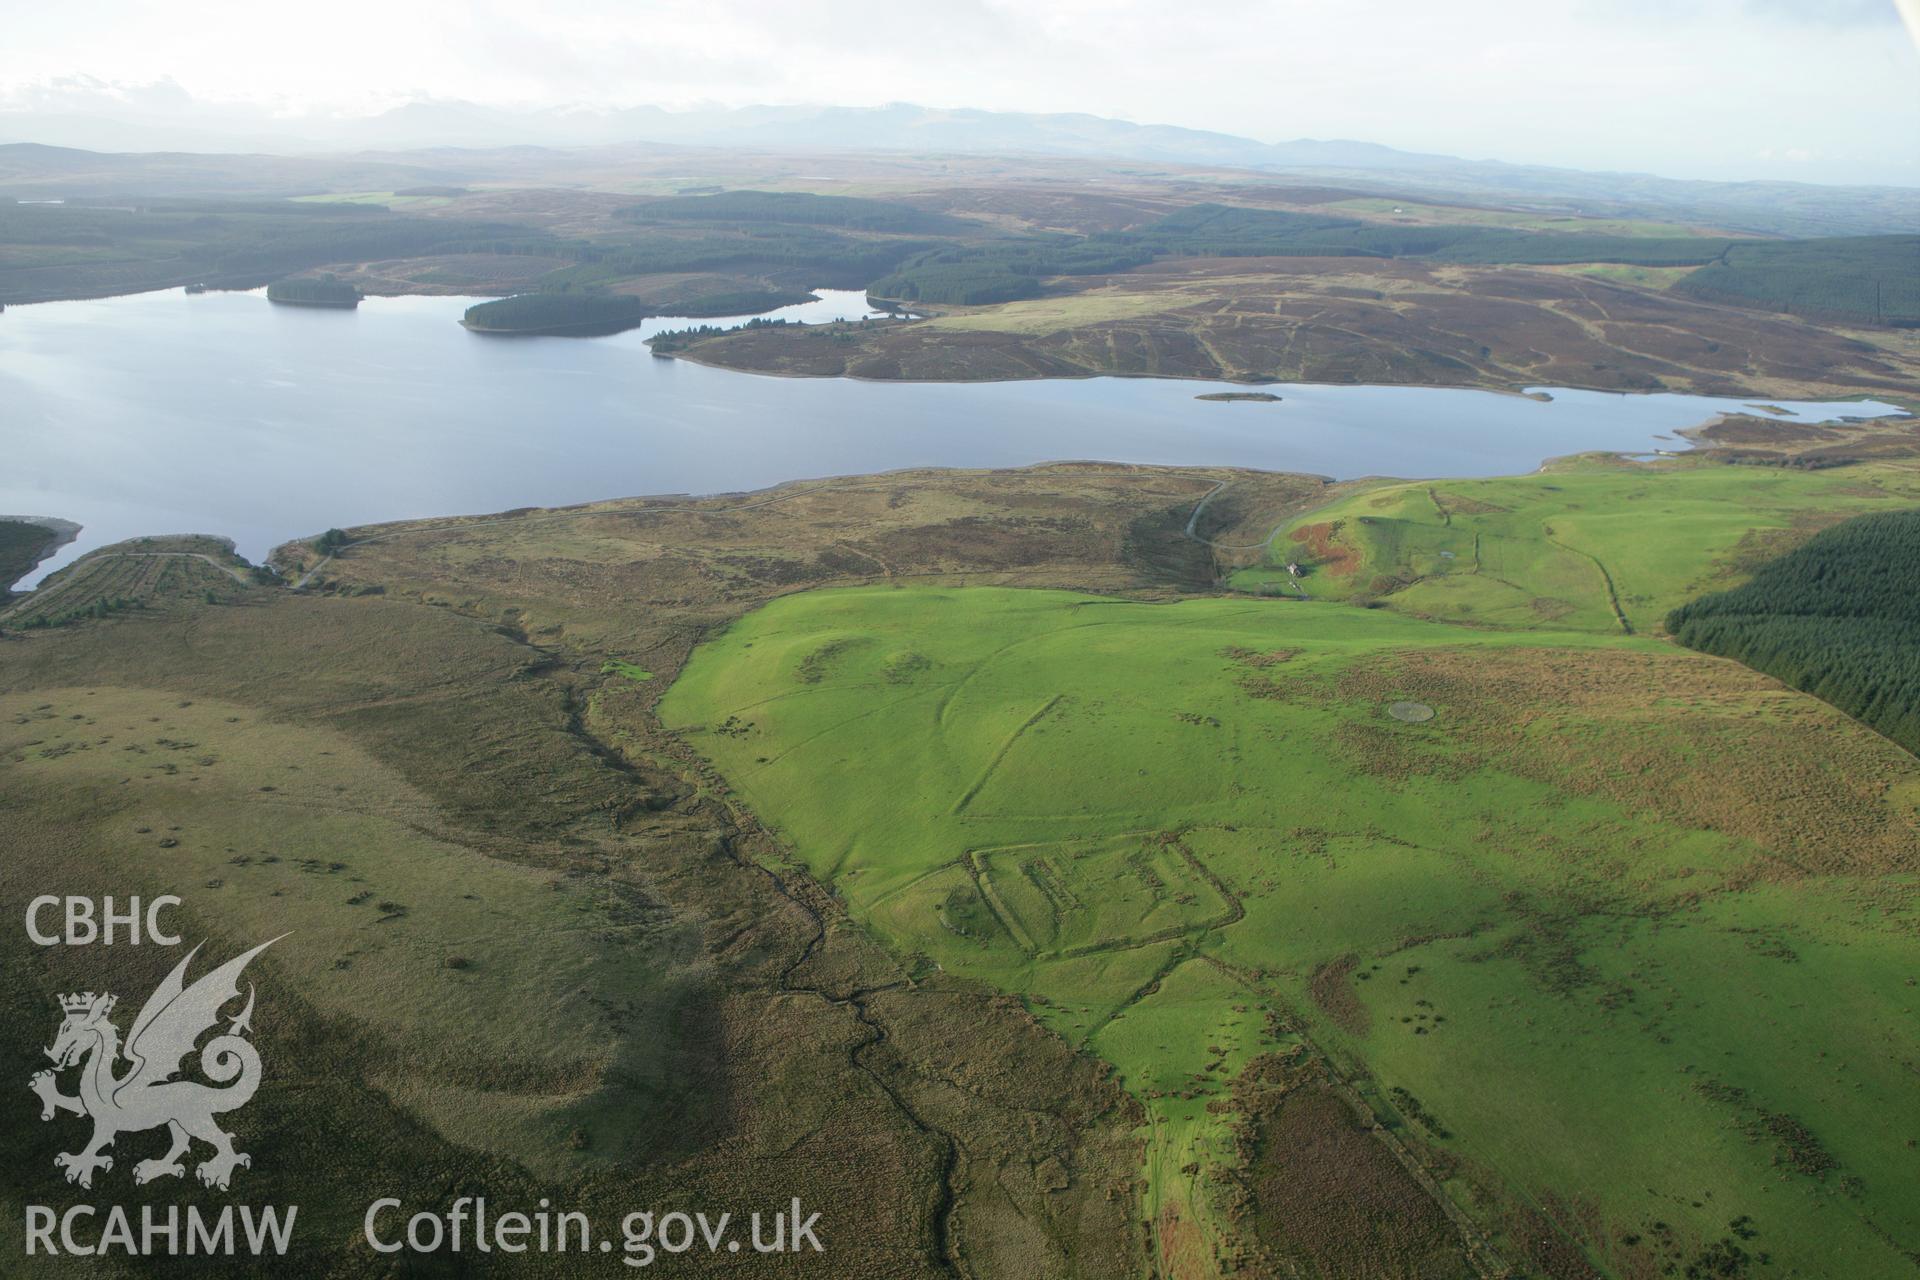 RCAHMW colour oblique aerial photograph of Hen Ddinbych. Taken on 10 December 2009 by Toby Driver